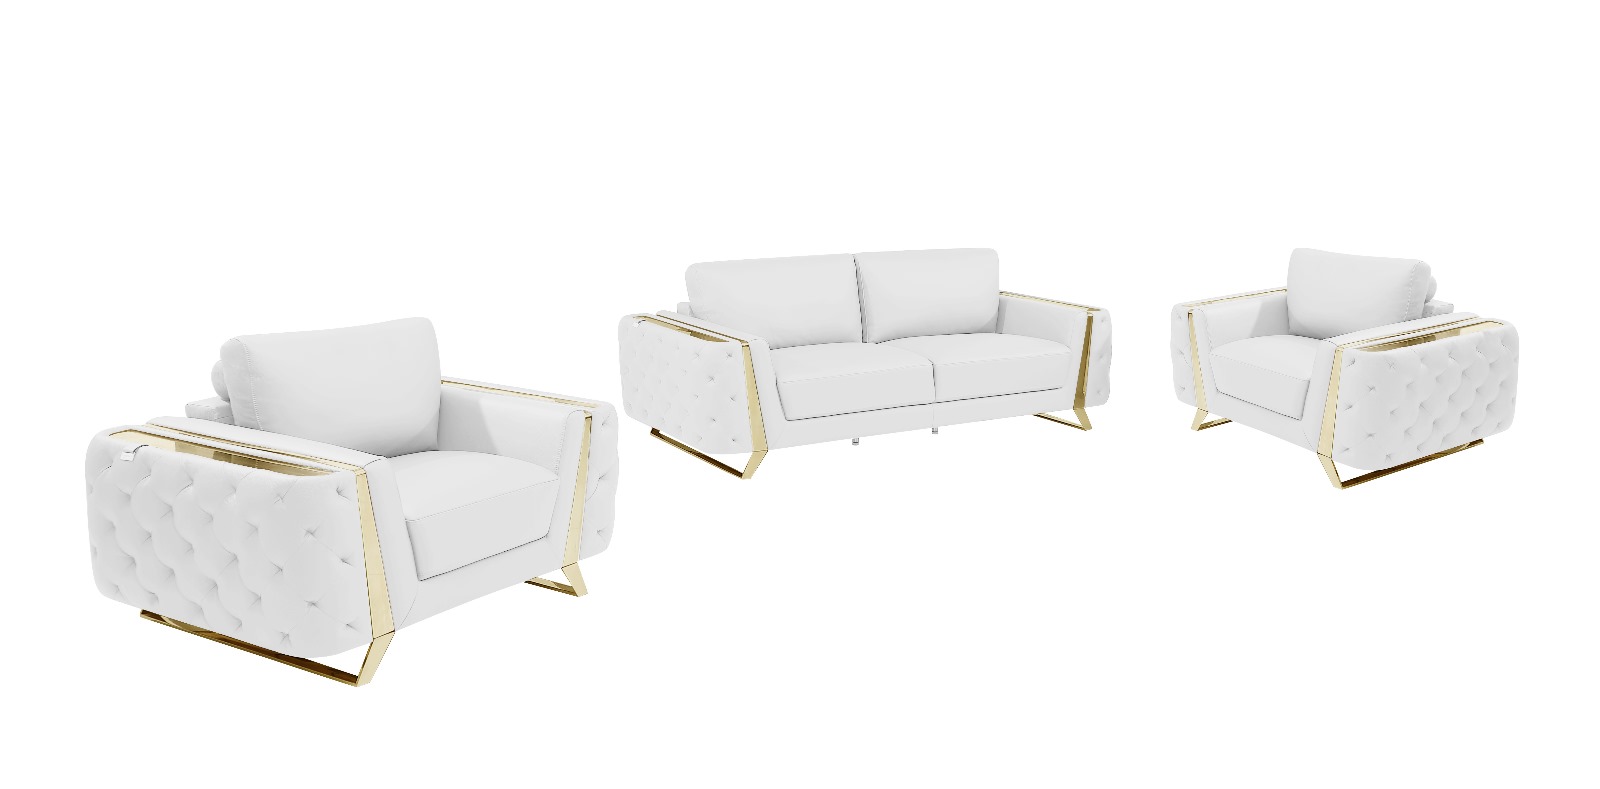 Three Piece Indoor White Italian Leather Six Person Seating Set-518560-1